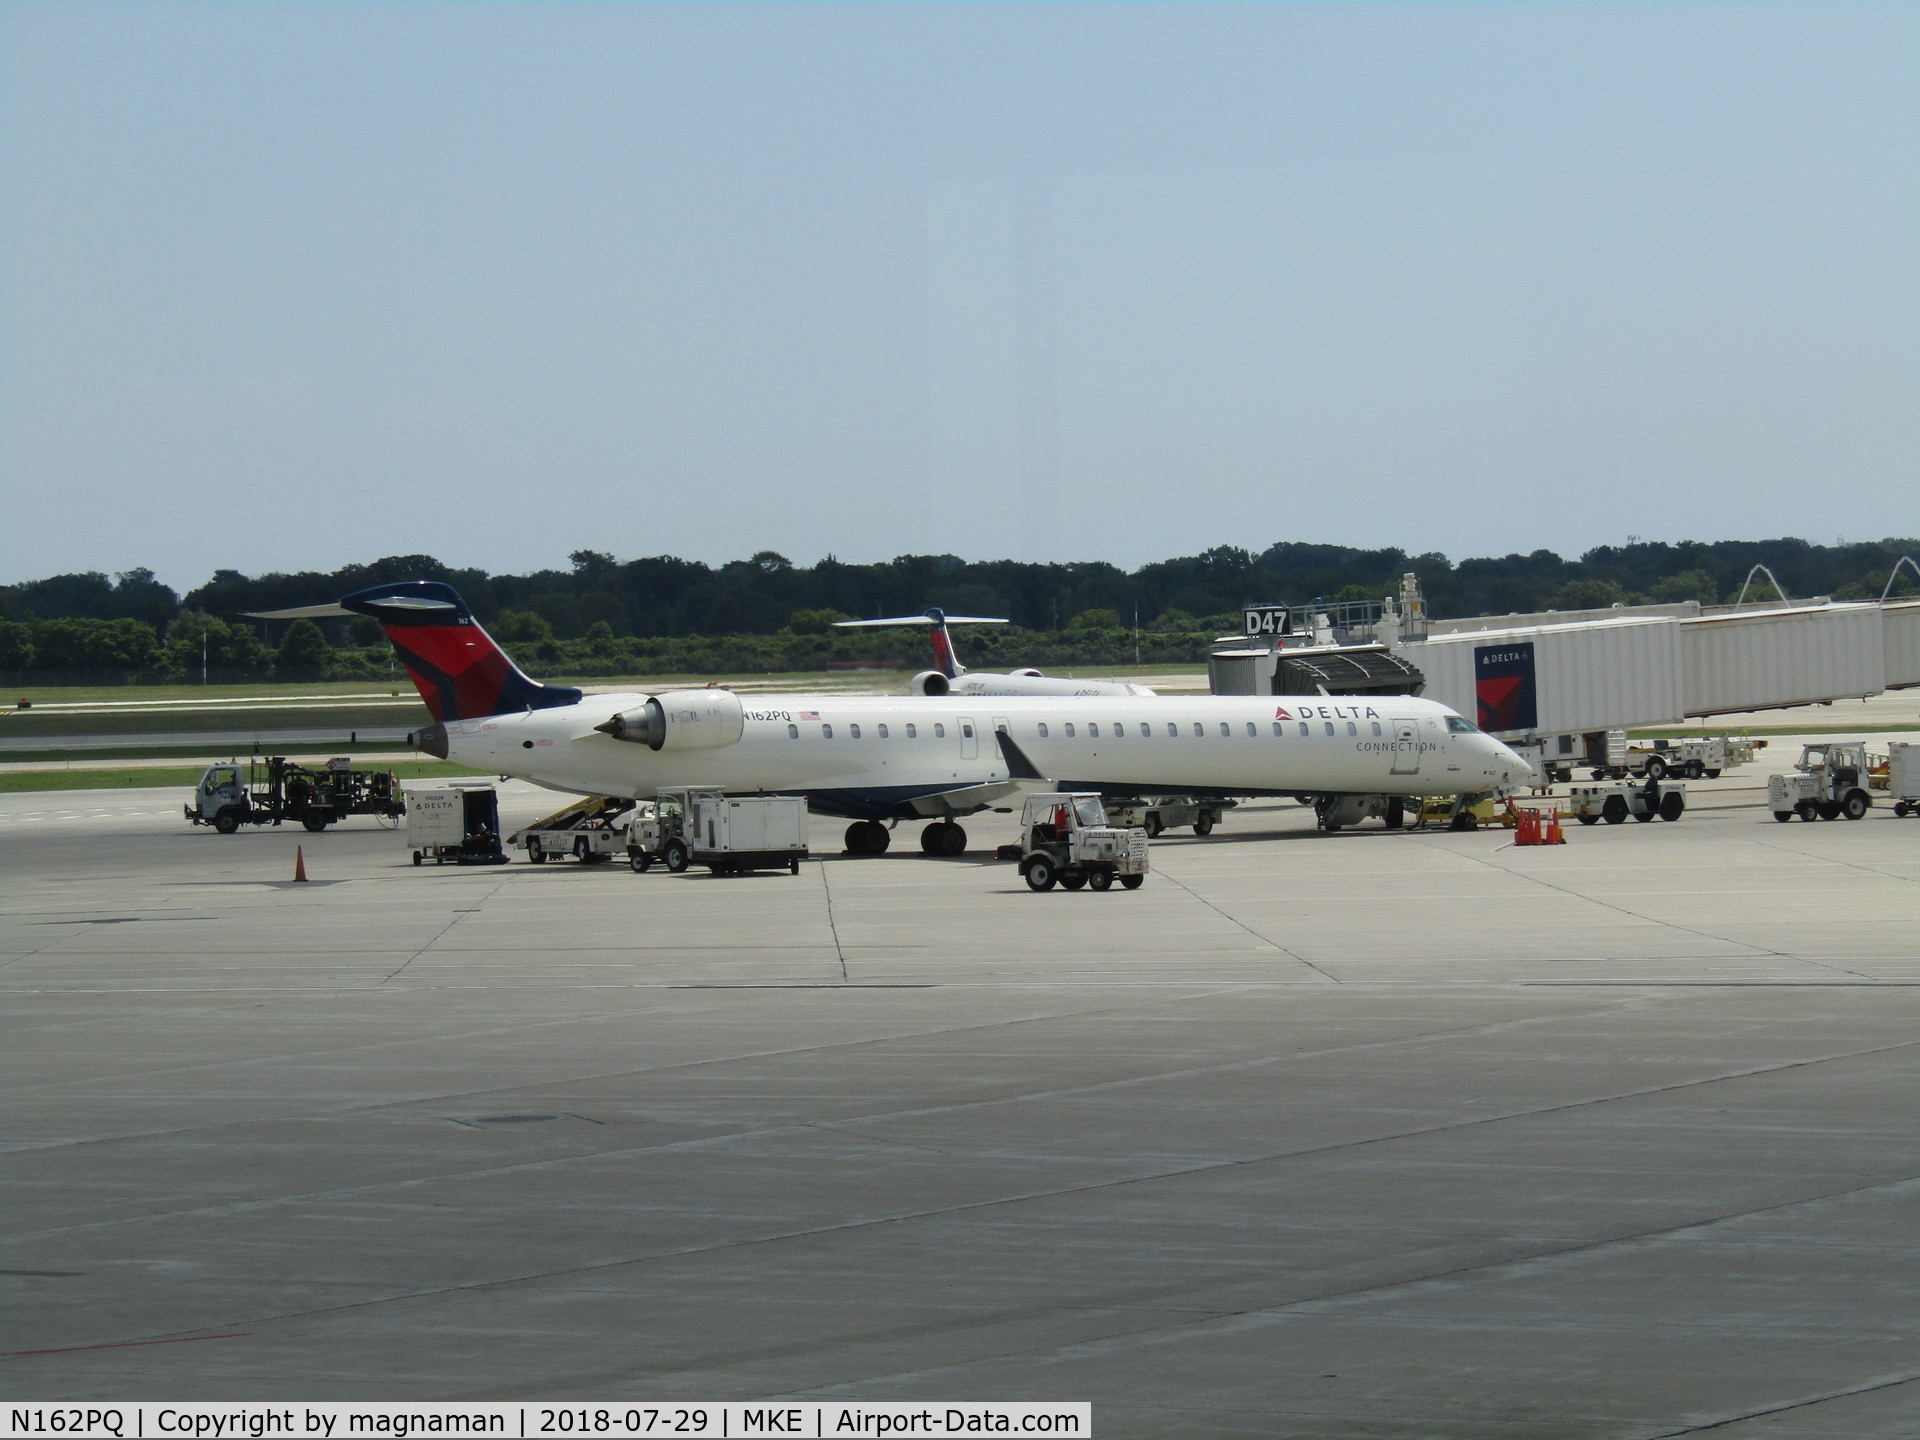 N162PQ, 2008 Bombardier CRJ-900ER (CL-600-2D24) C/N 15162, on stand at MKE